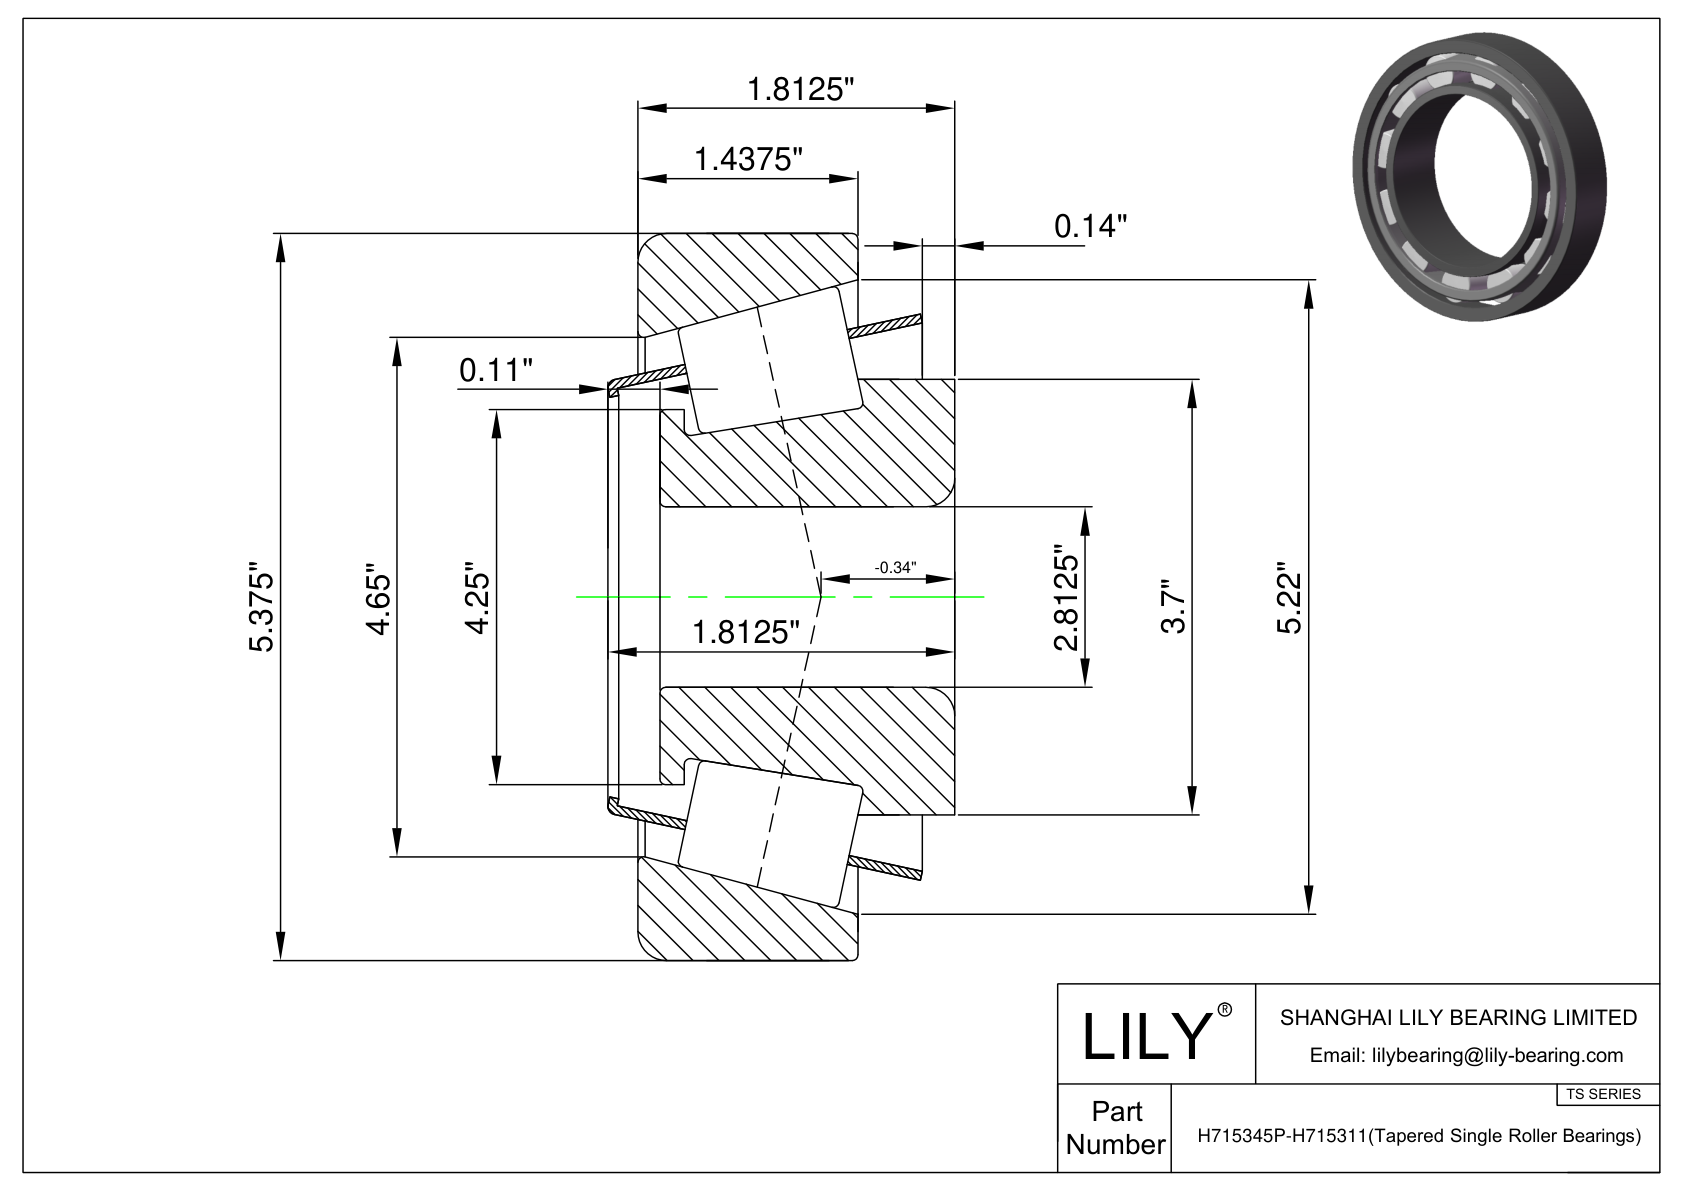 H715345P-H715311 TS (Tapered Single Roller Bearings) (Imperial) cad drawing